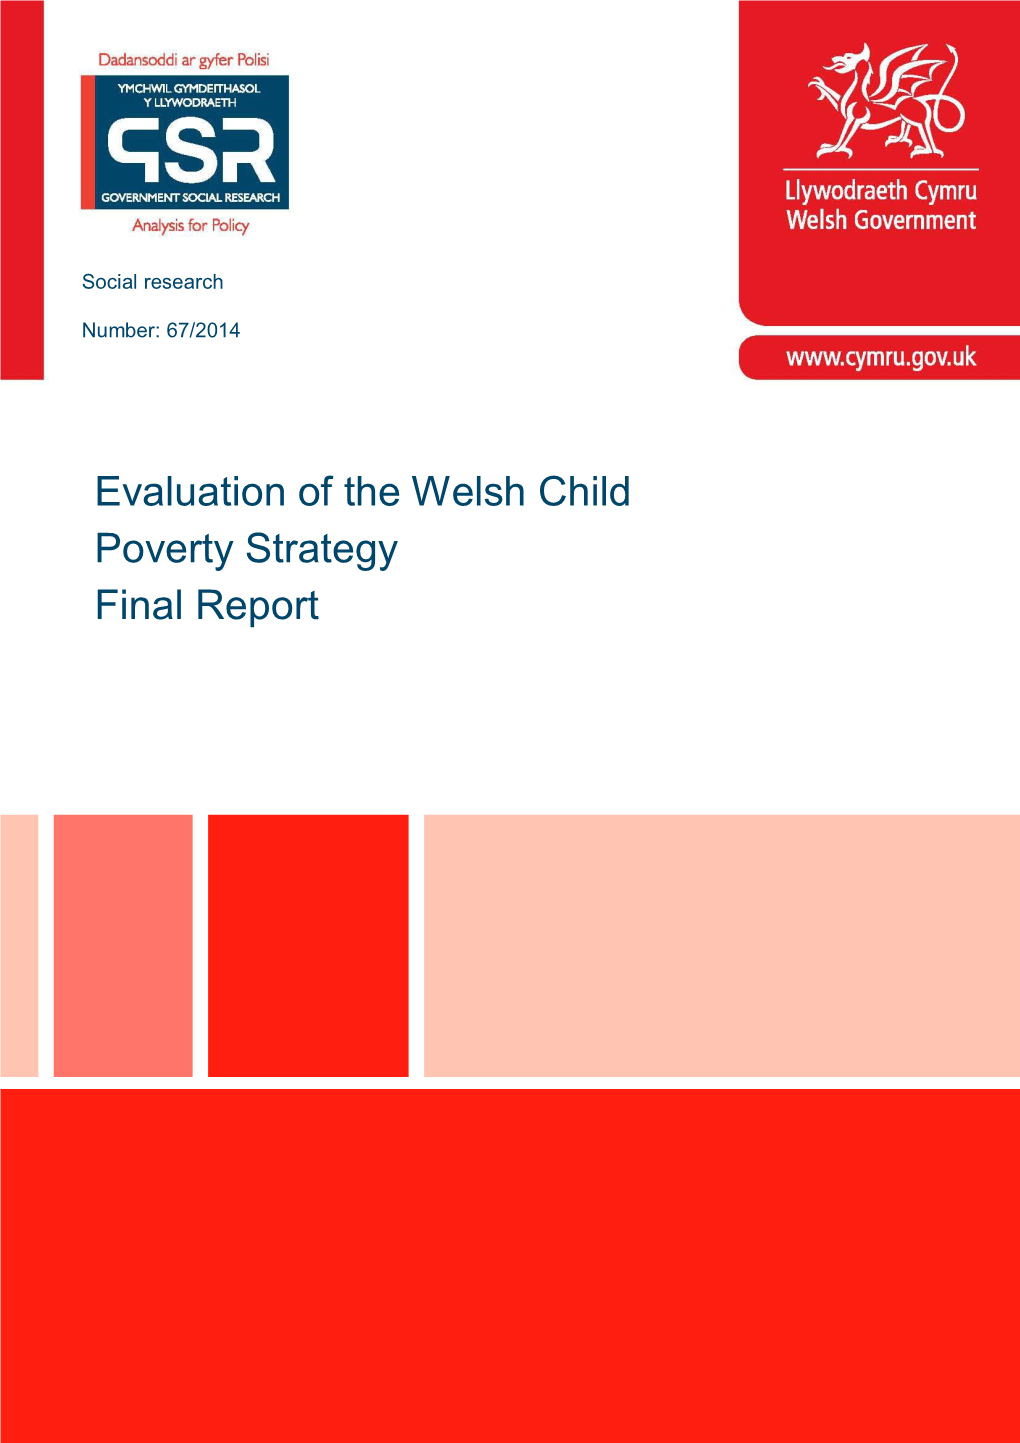 Child Poverty Strategy for Wales – Baseline Indicators